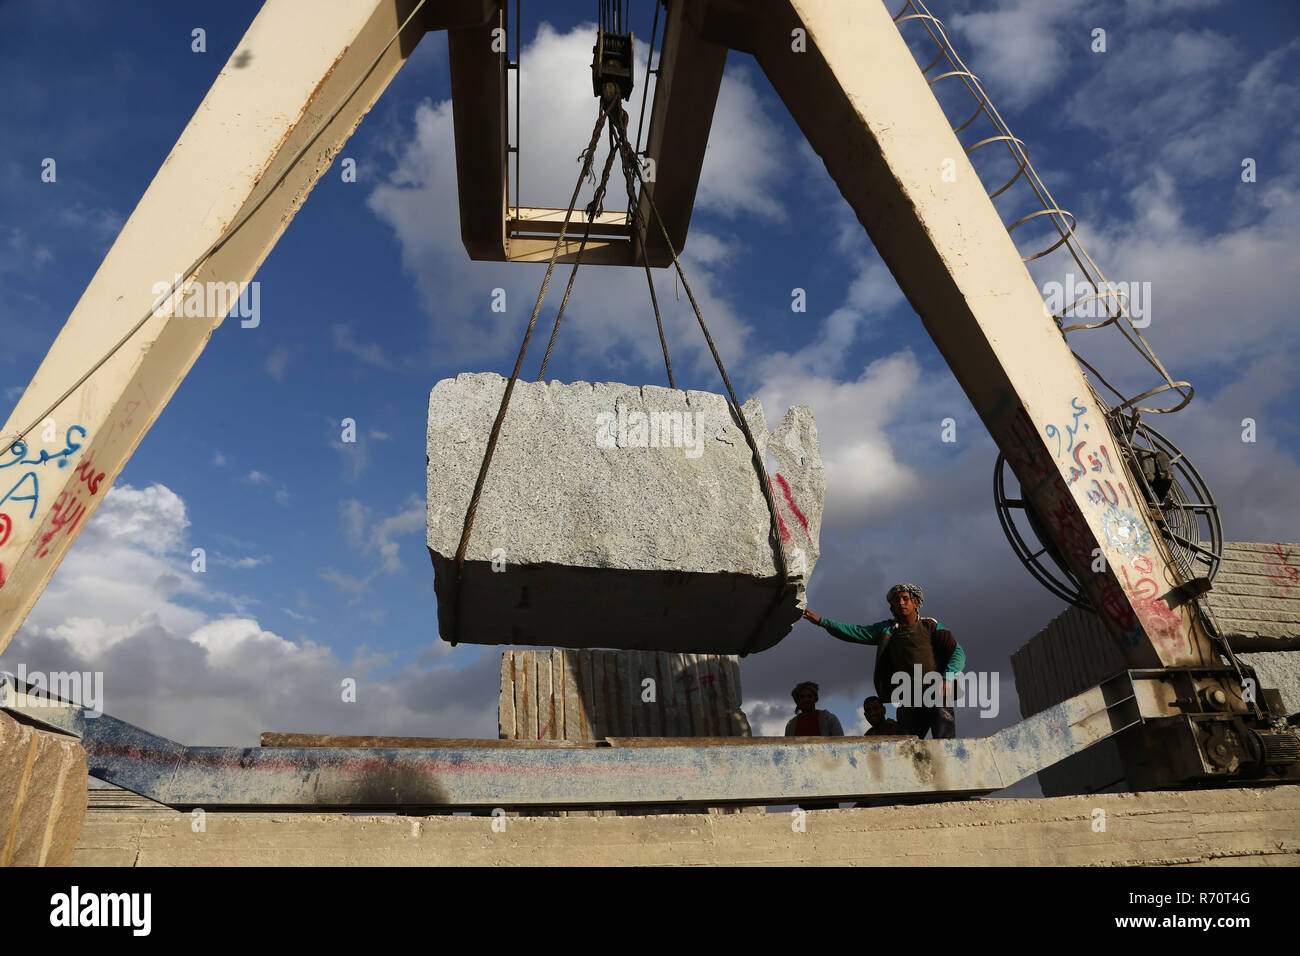 Cairo, Egypt. 6th Dec, 2018. People work in a marble and granite factory in Cairo, Egypt, on Dec. 6, 2018. In Shaq al-Thu'ban vast marble and granite industrial cluster near Egyptian capital Cairo's Maadi district, about 40 Chinese and Egyptian cooperative granite factories and 30 marble factories have significantly contributed to boosting the industry in the most populous Arab country. Credit: Ahmed Gomaa/Xinhua/Alamy Live News Stock Photo